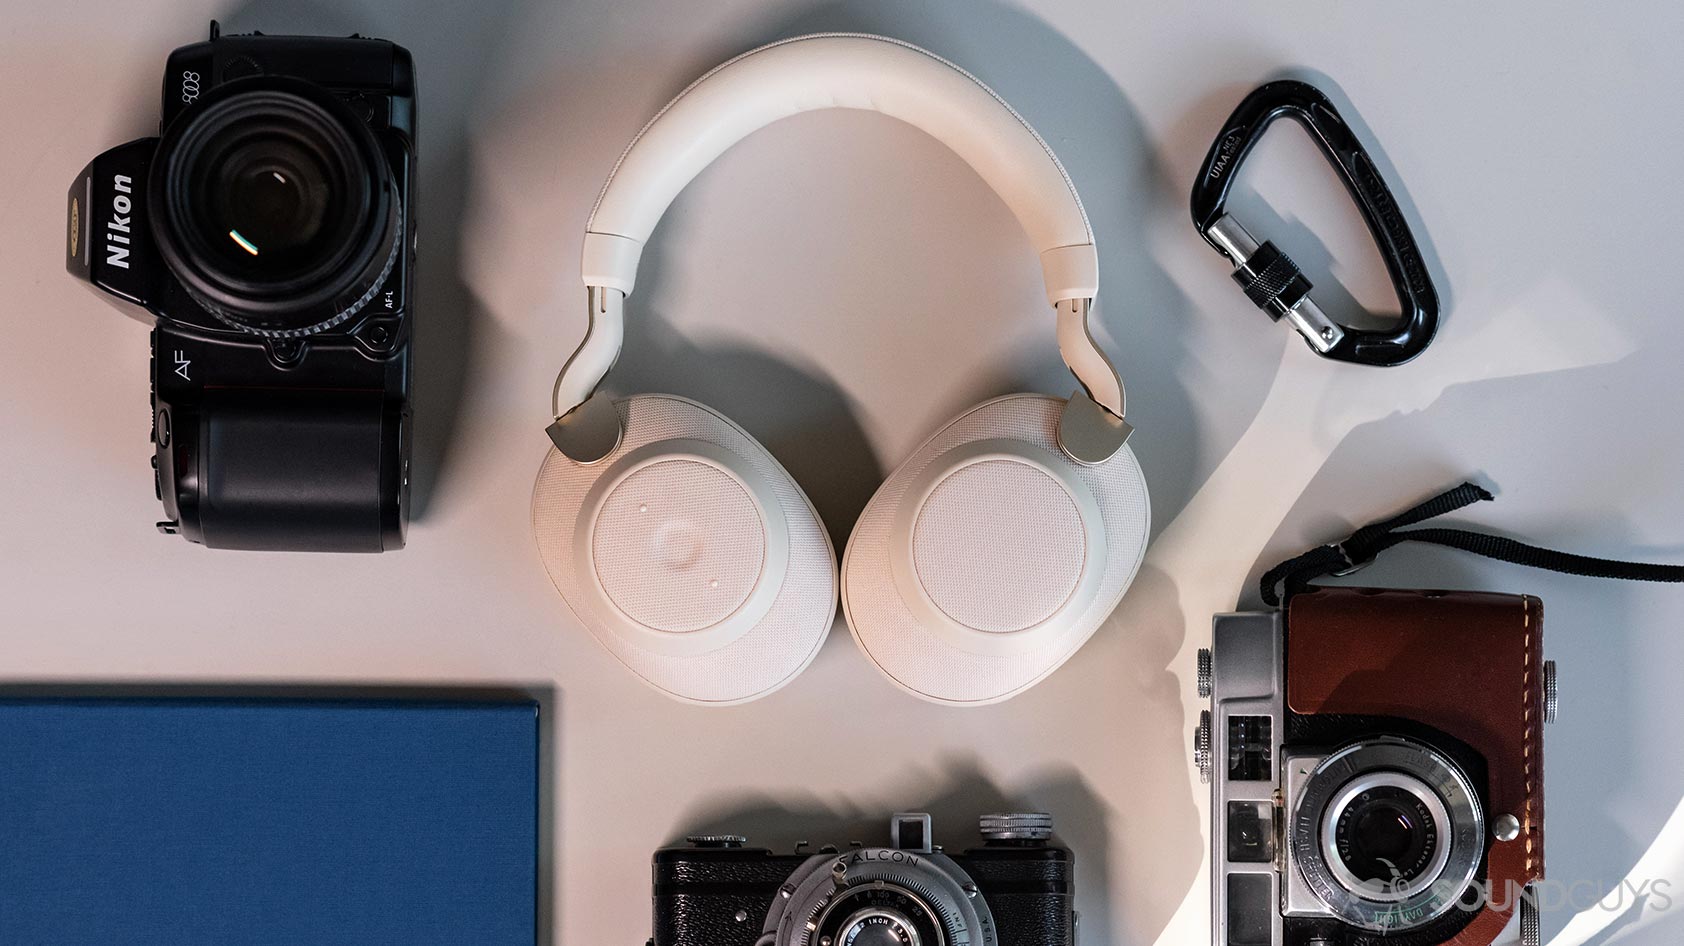 Aerial image of the Jabra Elite 85h headphones folded flat on a table and surrounded by vintage cameras, a blue notebook, and a black carabiner.